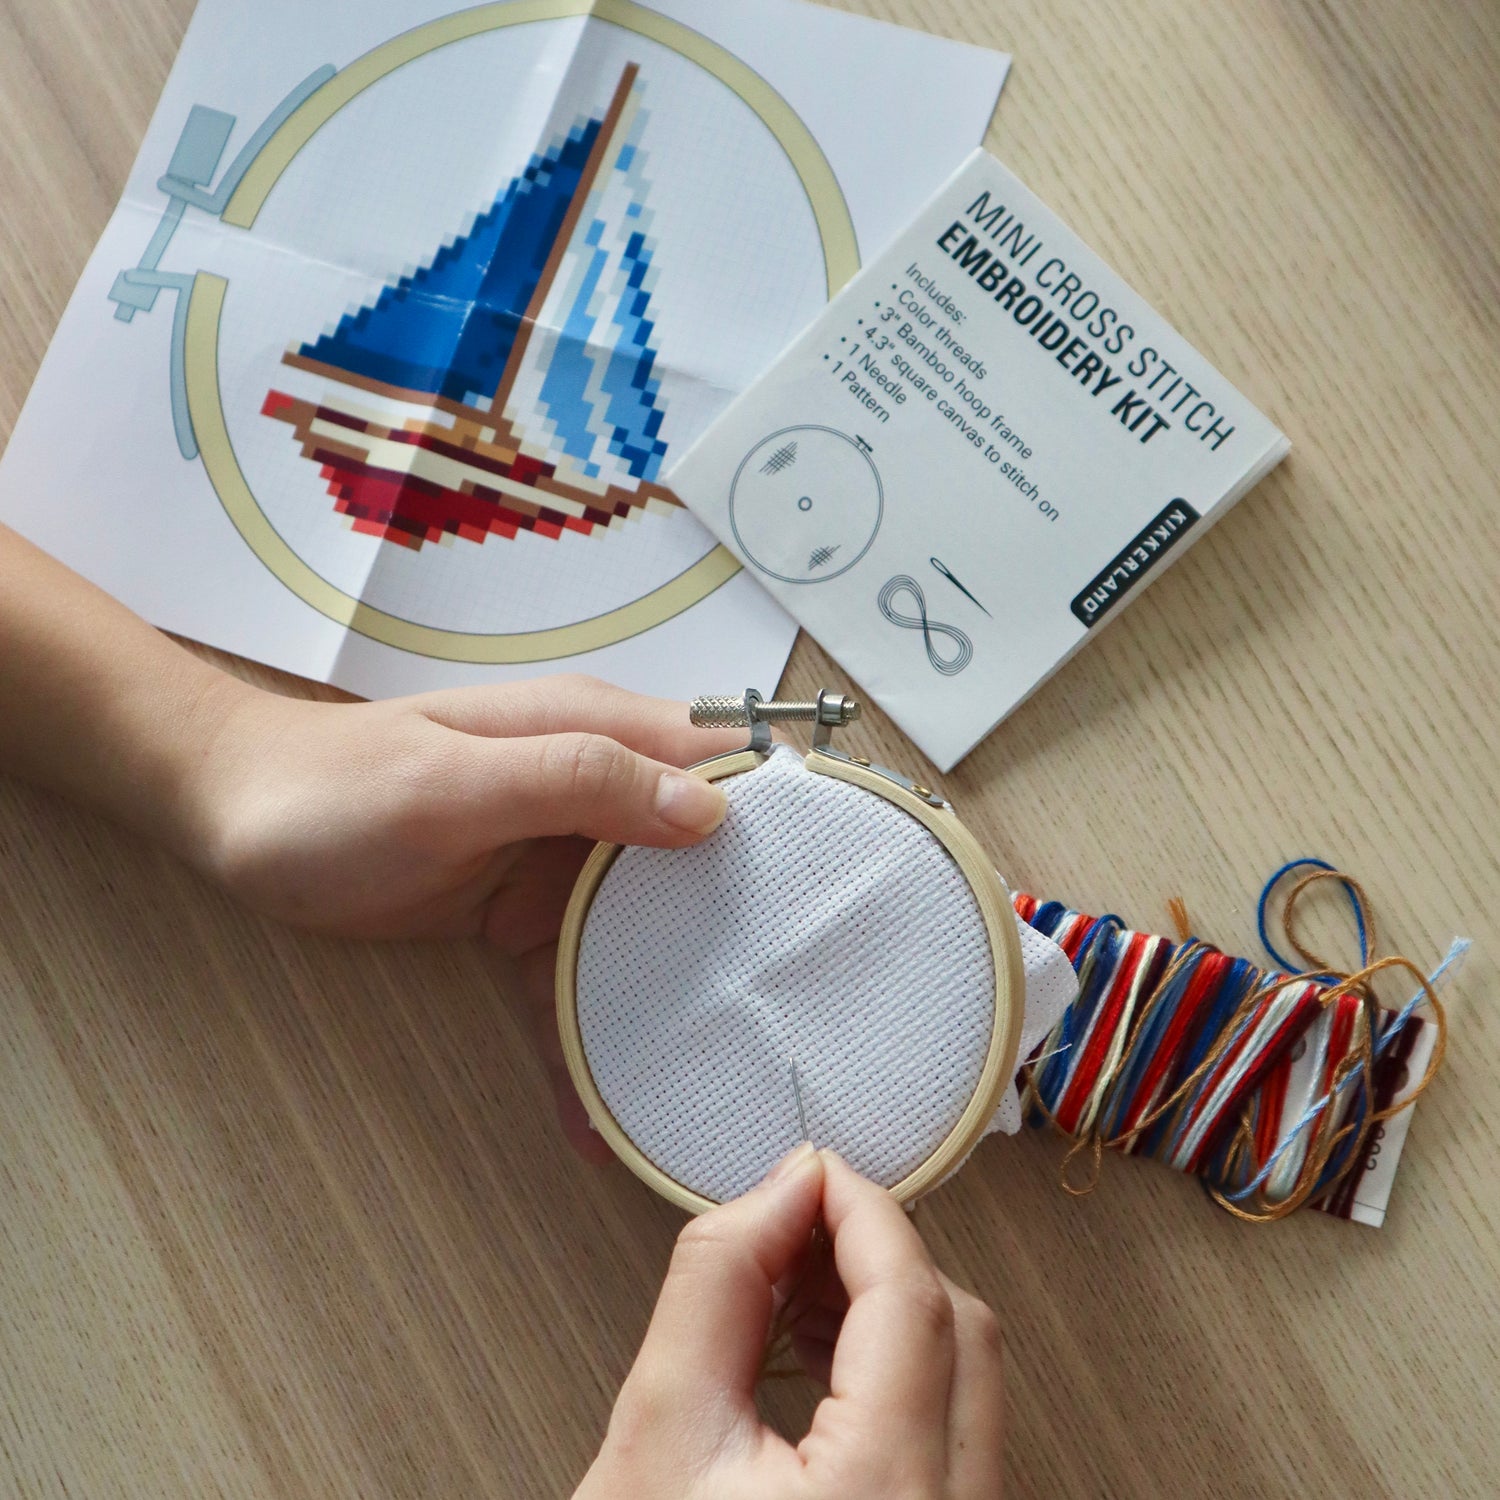 MiniCrossStitch Embroidery Sailboat